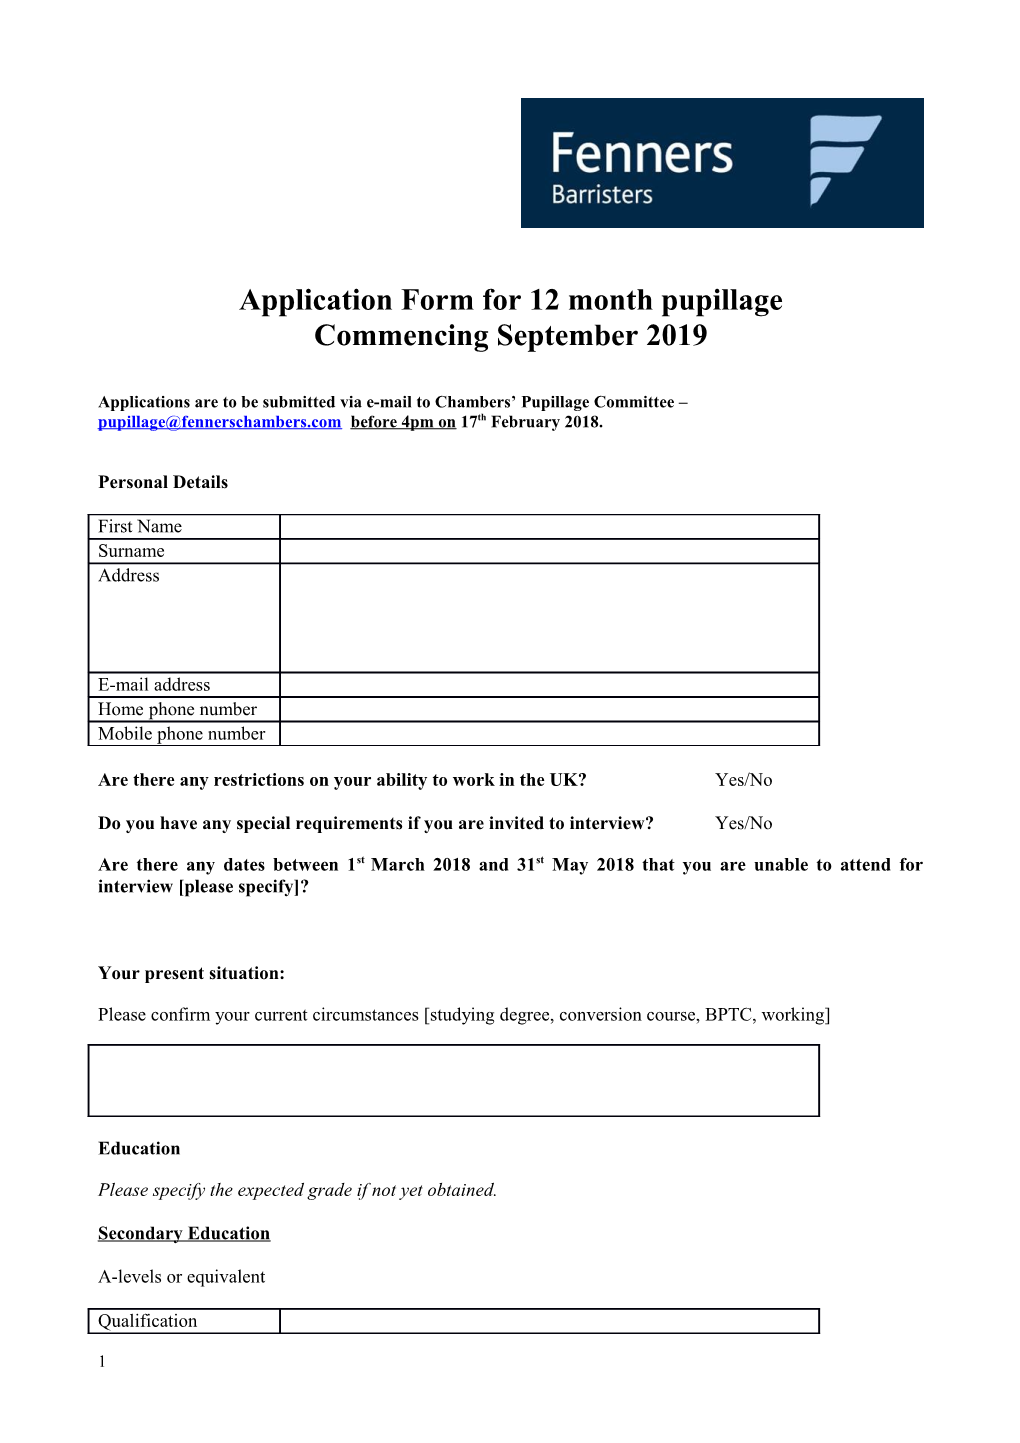 Application Form for 12 Month Pupillage